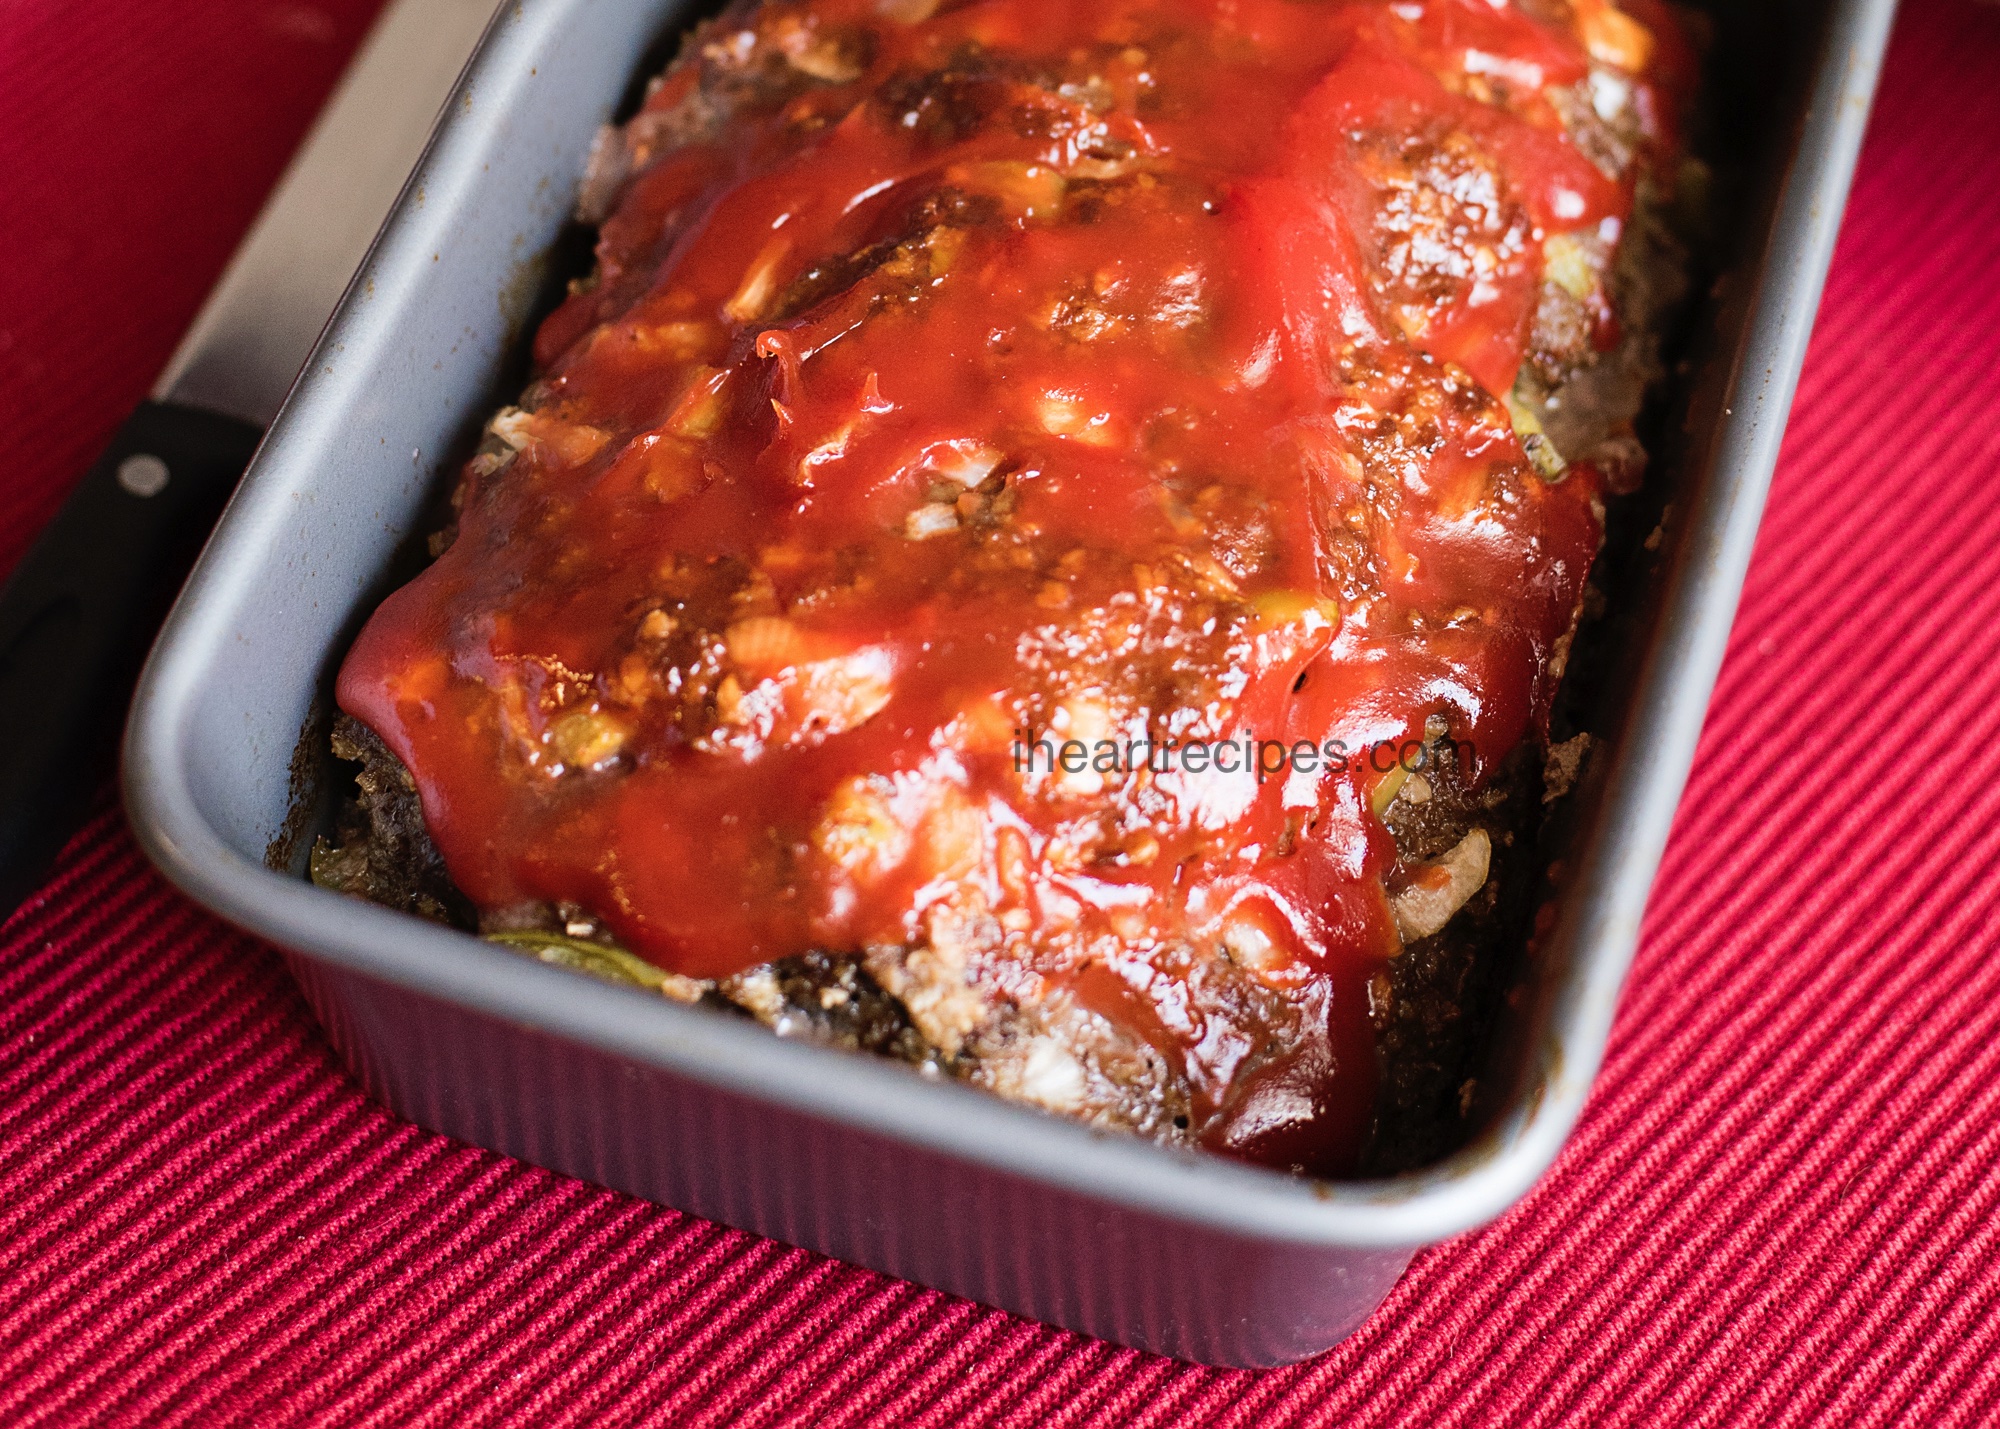 Moist and tender classic meatloaf in a piping hot pan ready for family dinner!